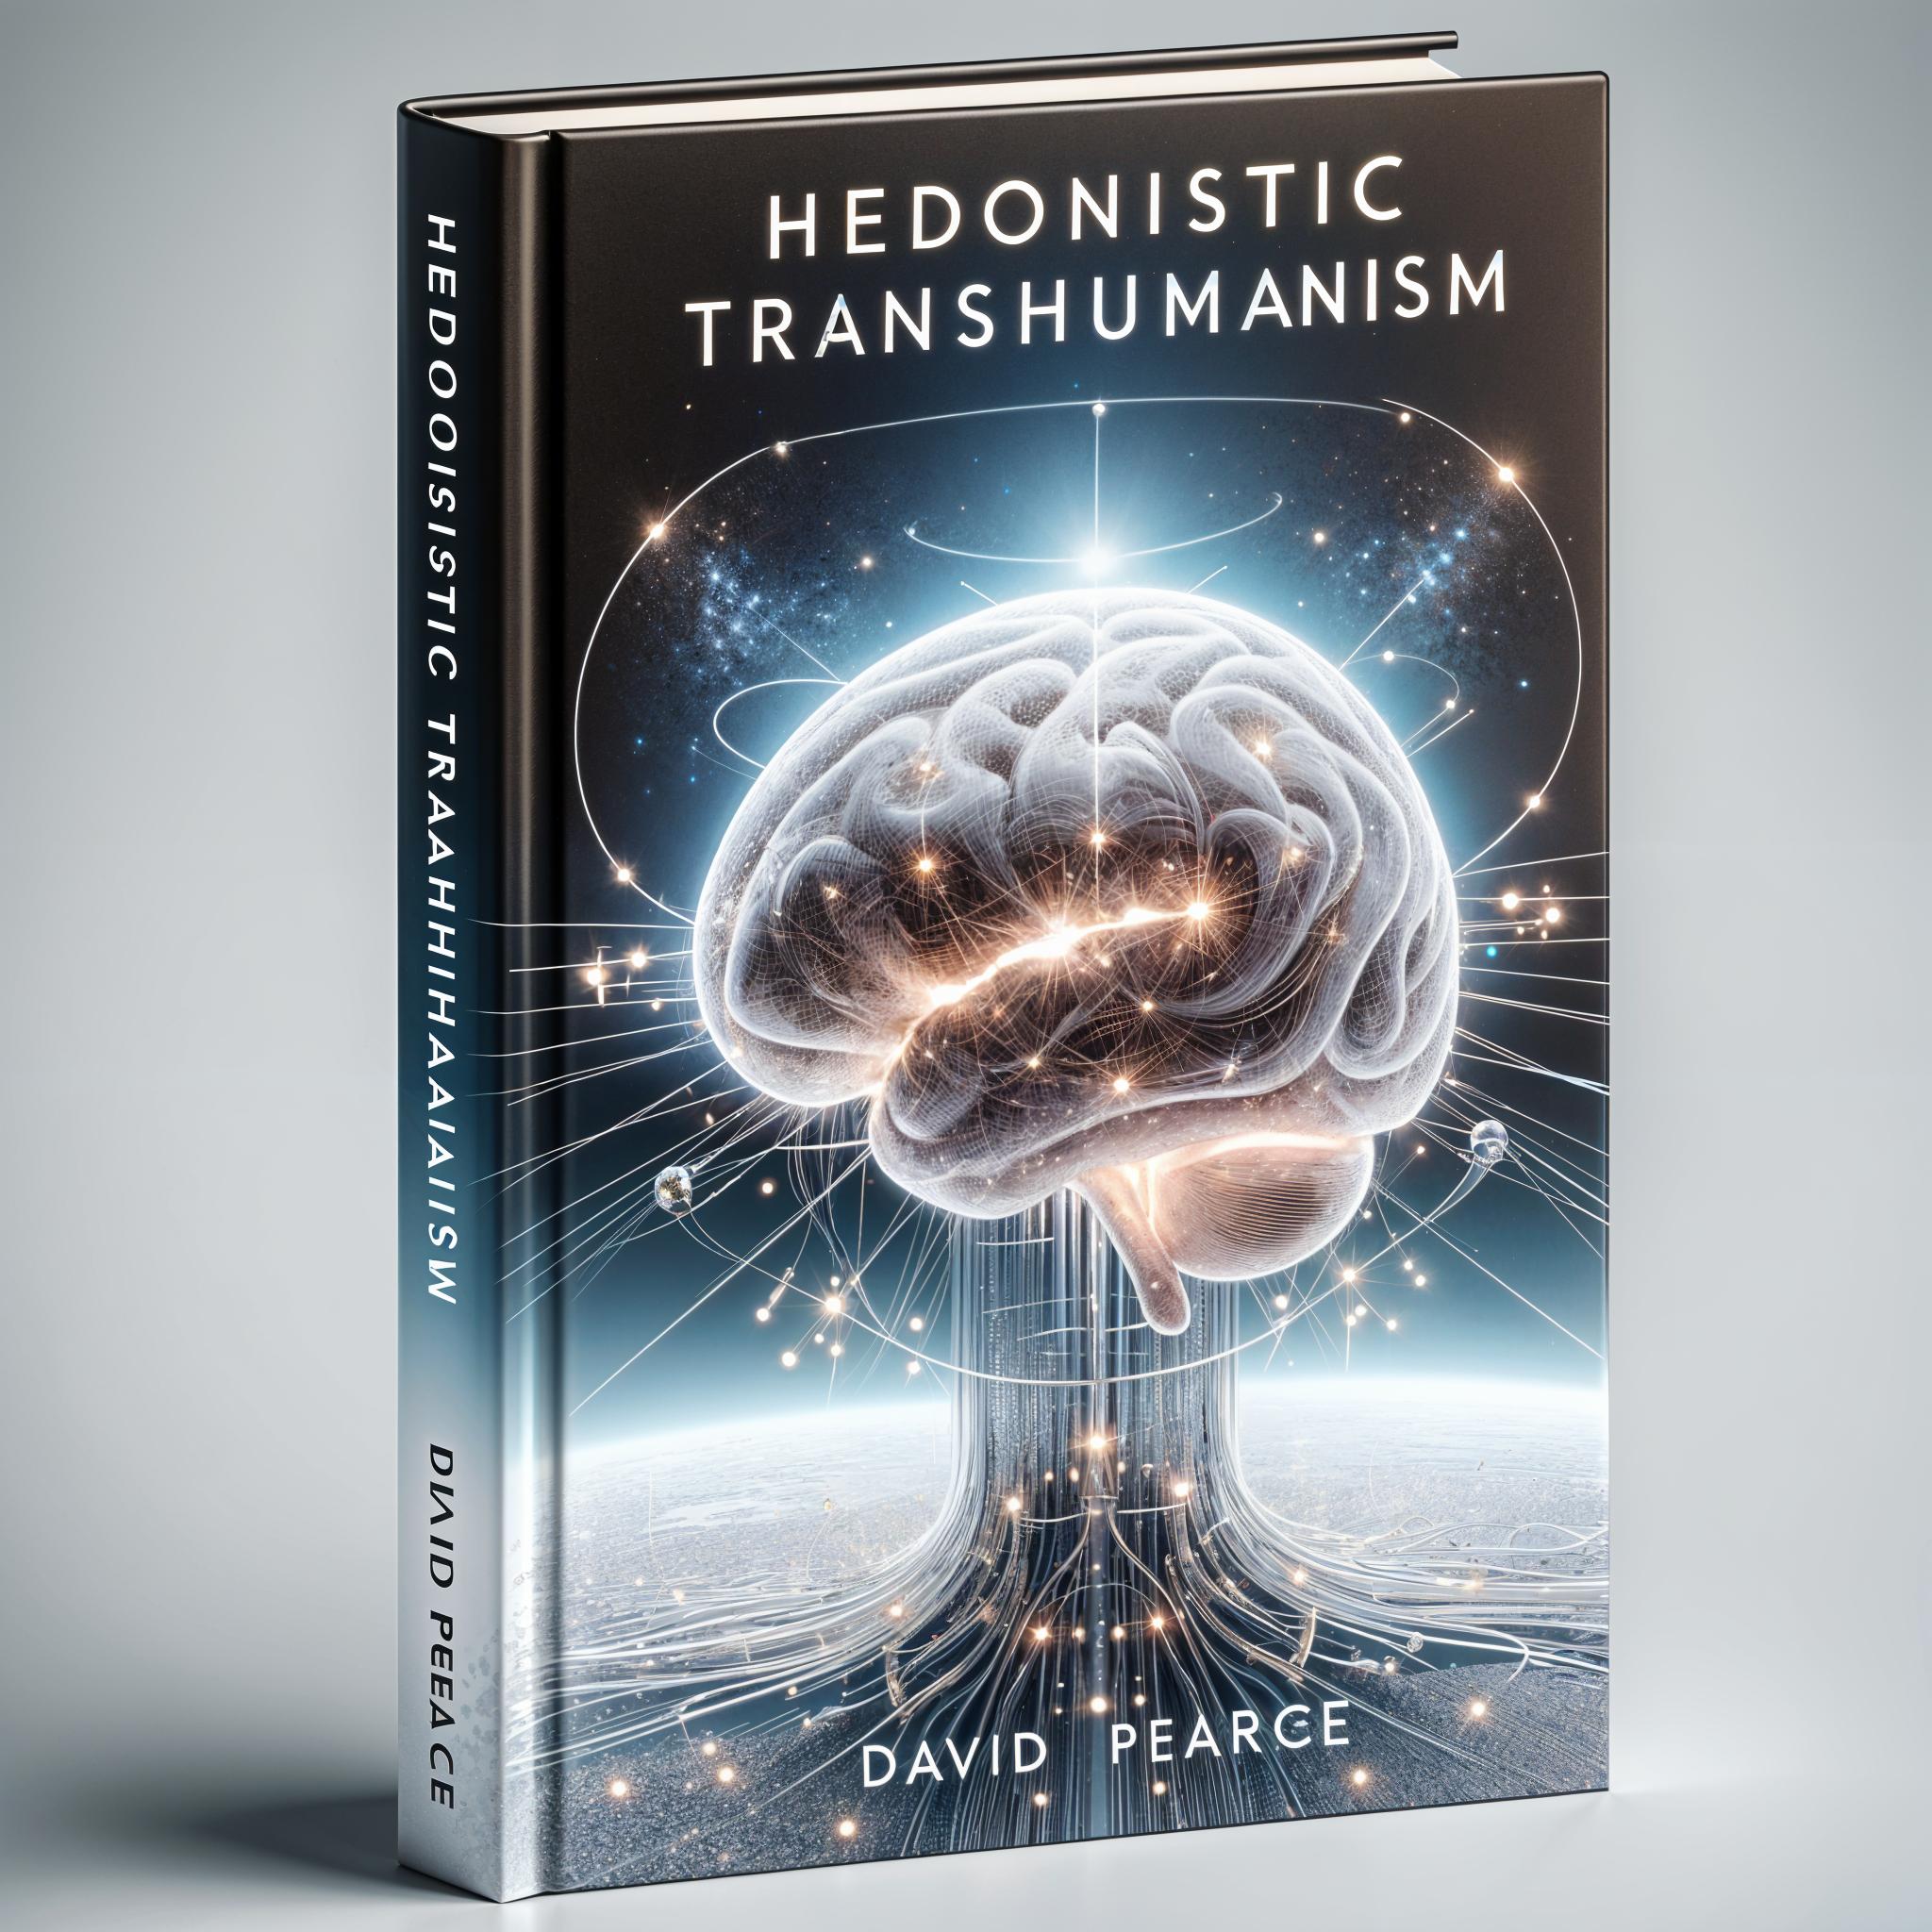 Hedonistic Transhumanism by David Pearce